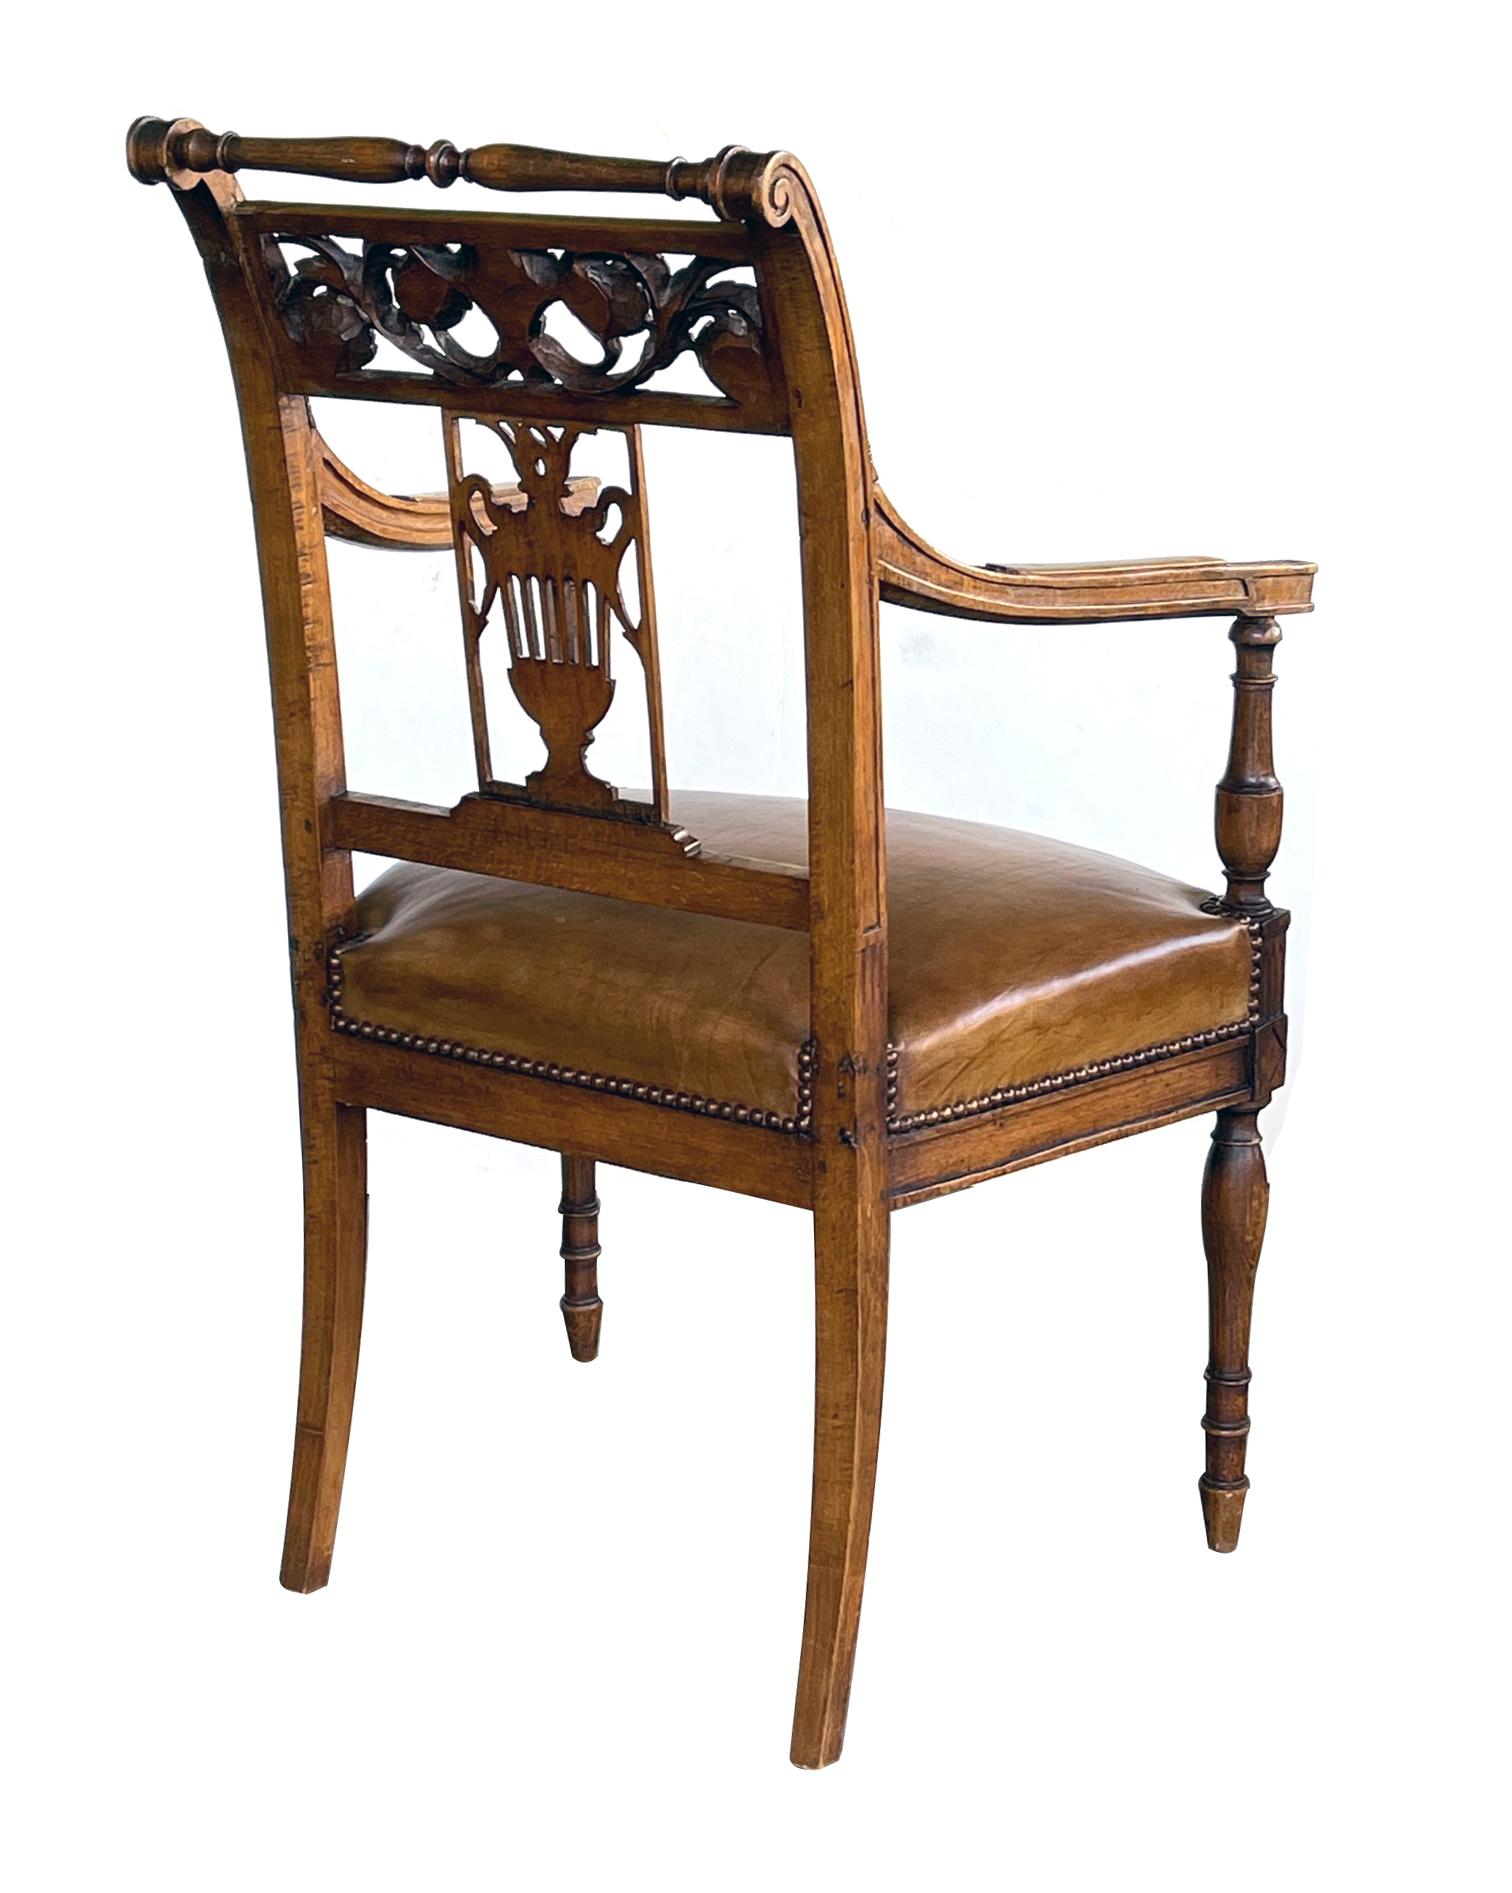 Italian Neoclassical Carved Fruitwood Armchair with Leather Seat For Sale 4